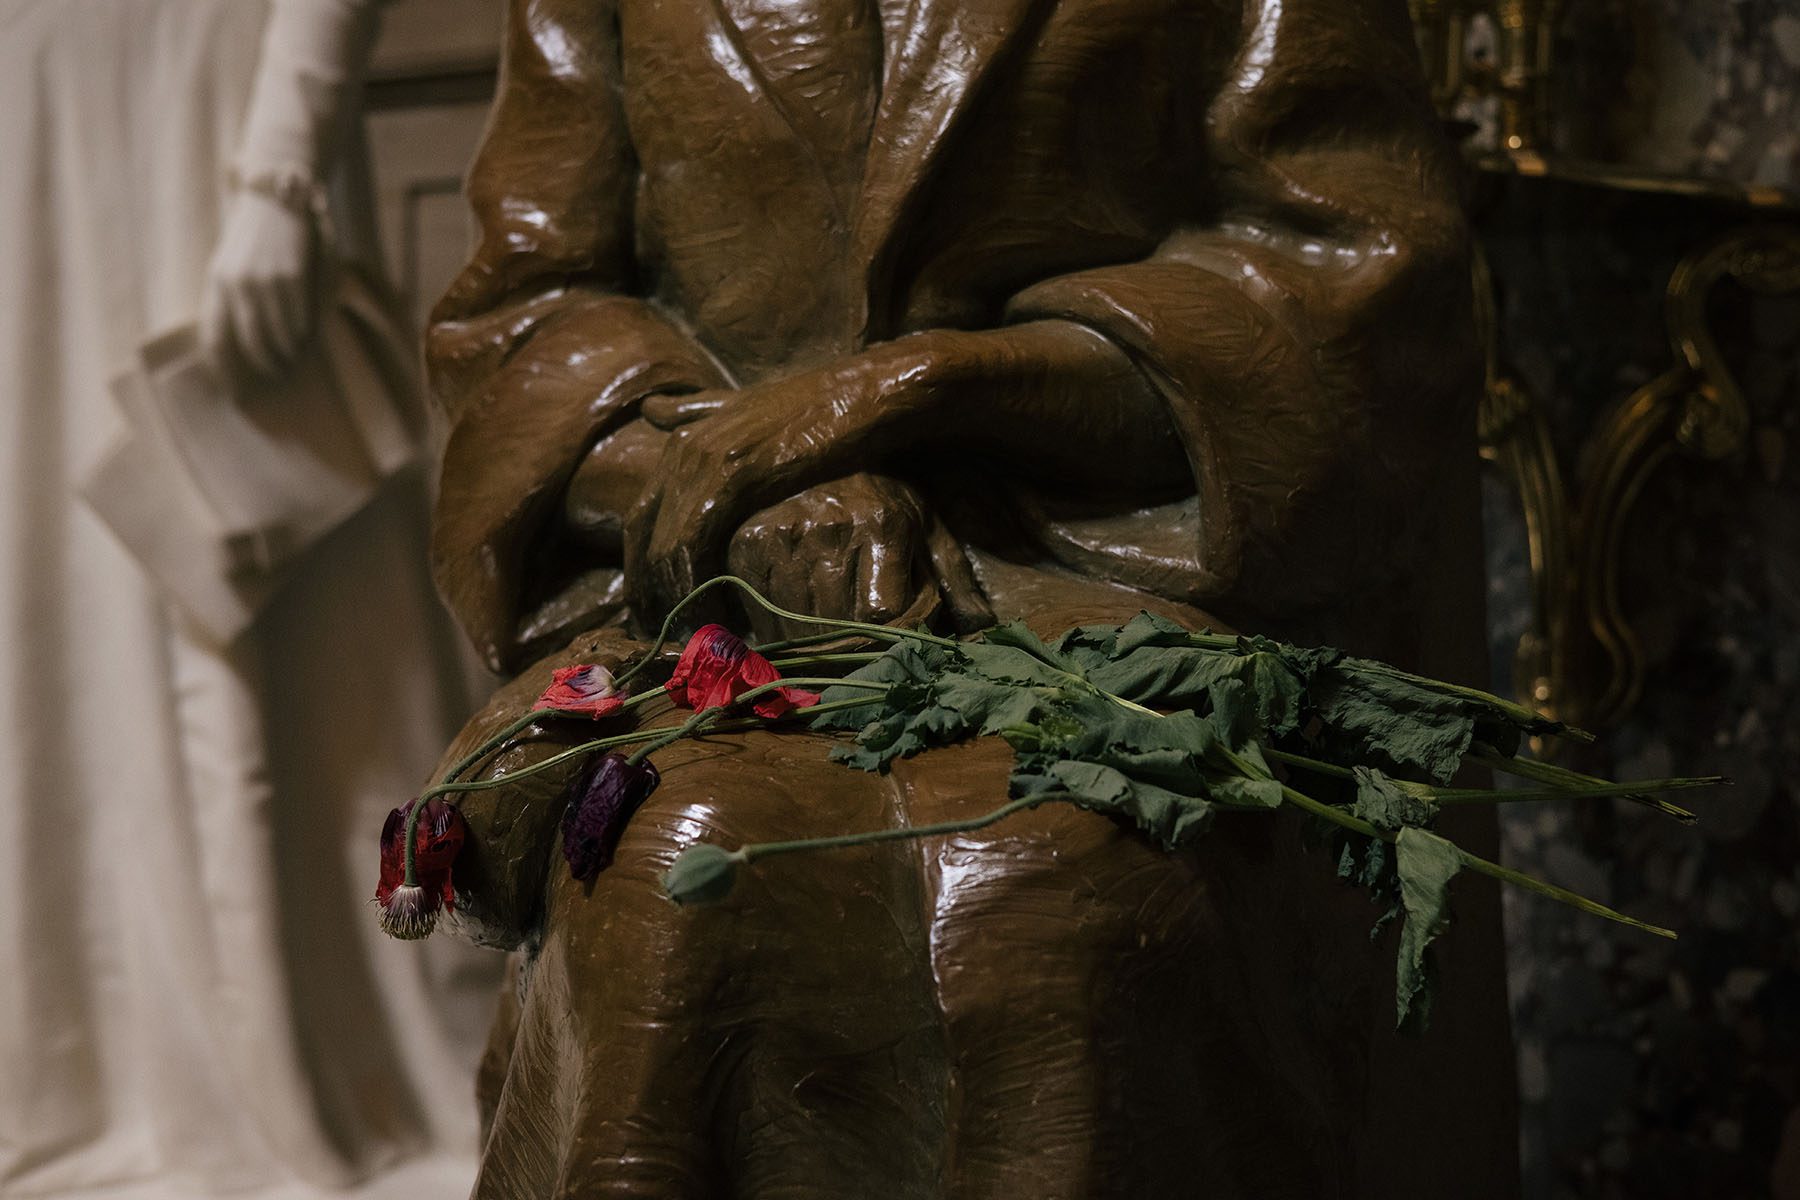 Roses dry on the lap of a statue of civil rights icon Rosa Parks.